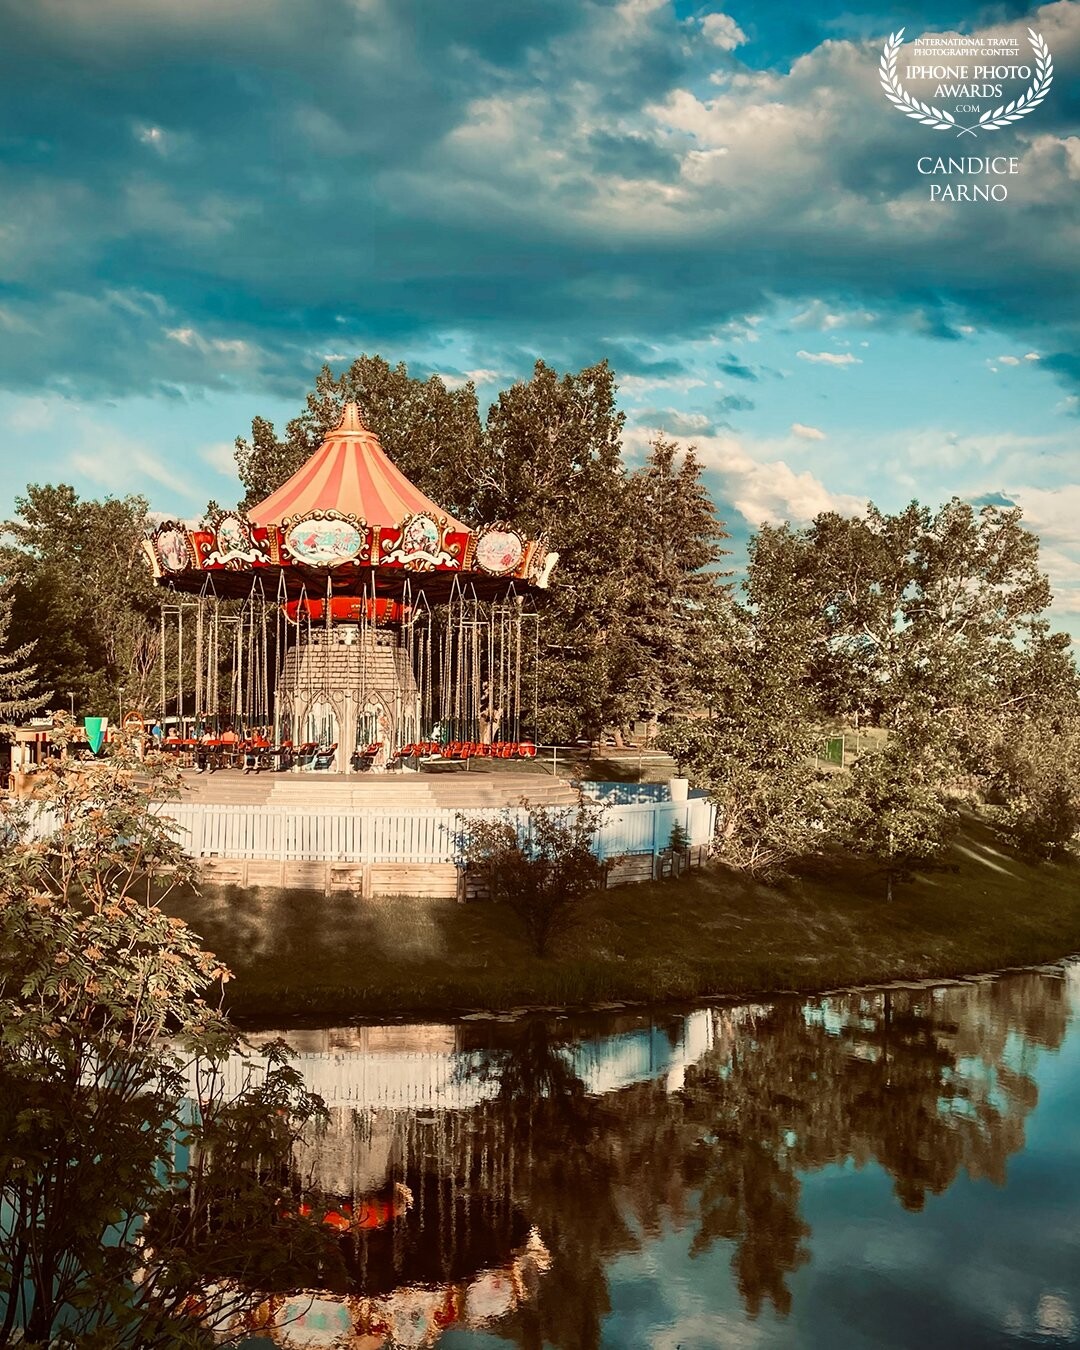 15 minutes outside of Calgary, Alberta is western Canada’s largest outdoor amusement park.  My son and I had just spent a very fun day riding all the rides and eating way to much cotton candy when I captured our favourite ride bathed in evening sun and reflected on the pond.  A perfect capture to end a perfect day!